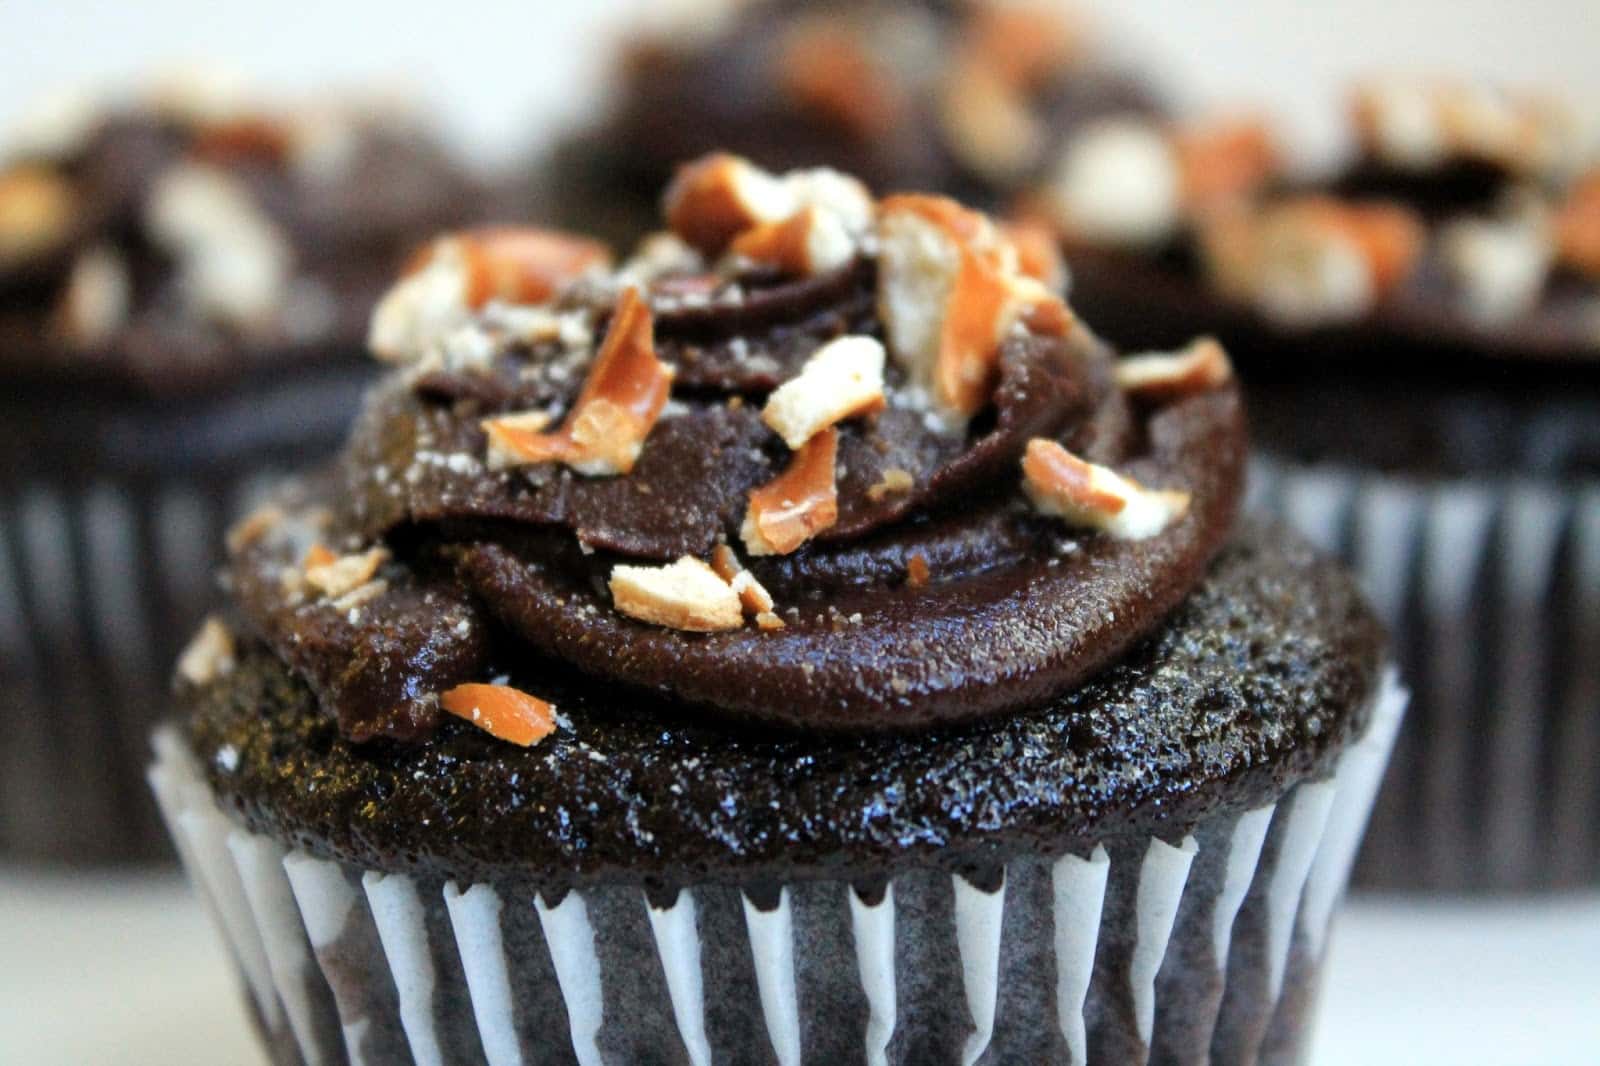 Sinfully decadent chocolate cupcakes filled with a creamy peanut butter filling and topped with whipped chocolate ganache and crushed pretzel.